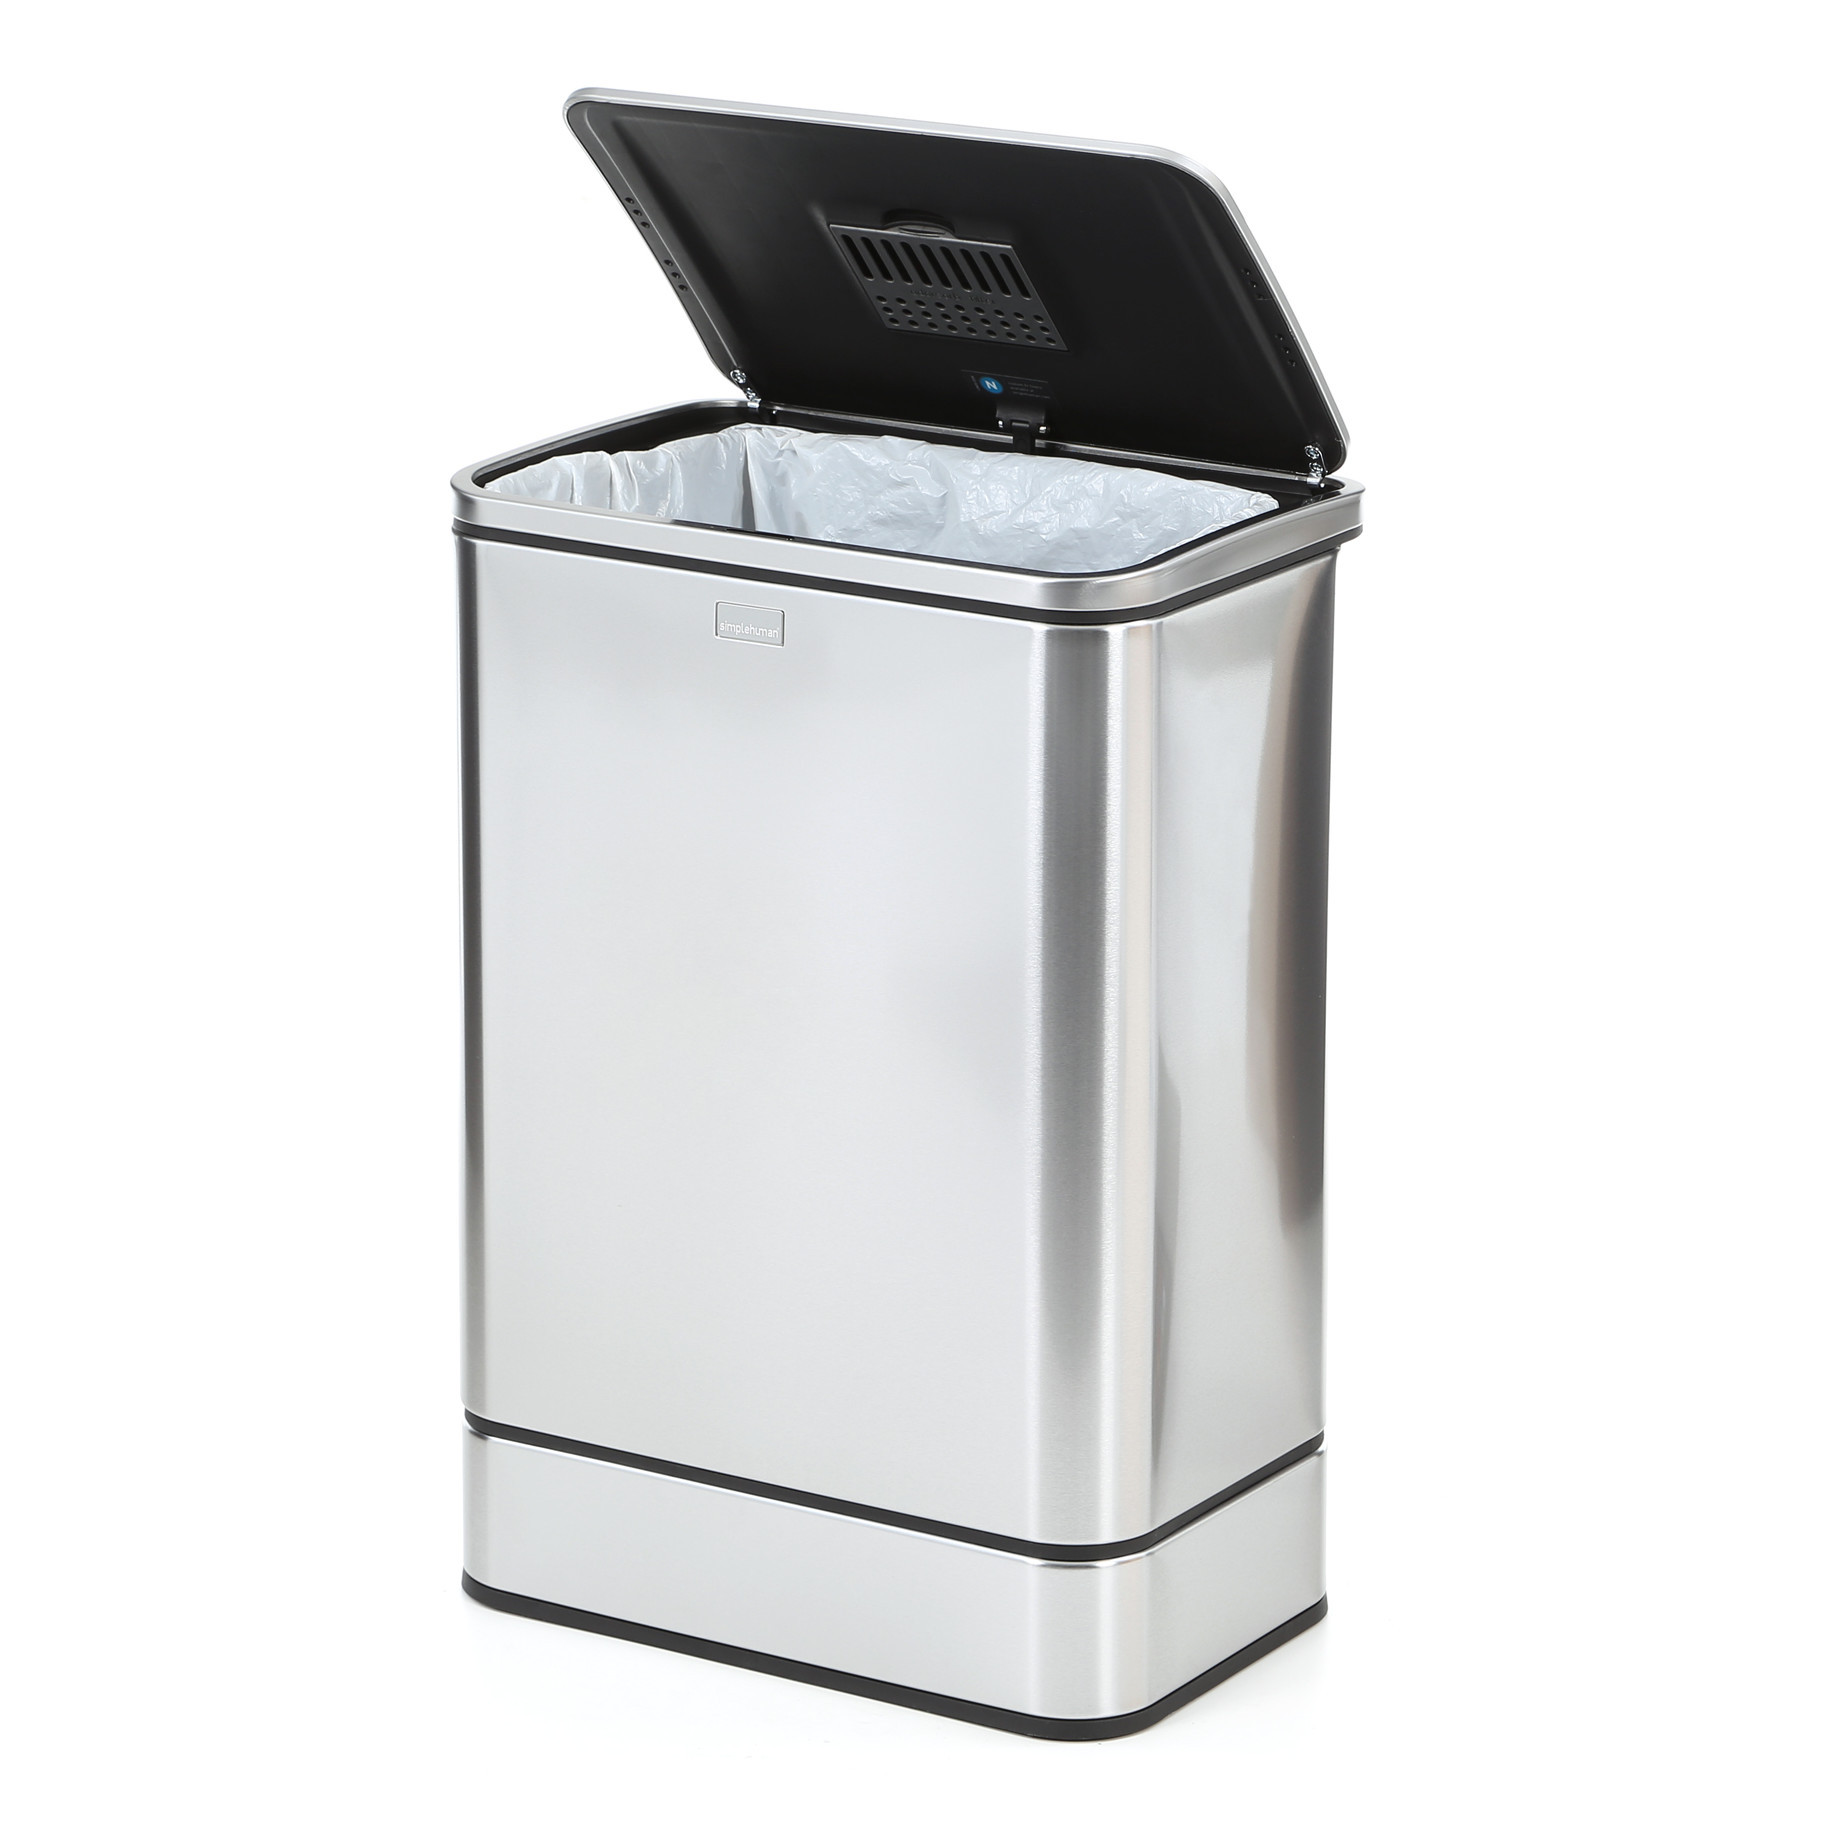 Modern Kitchen Trash Can
 Kitchen Stainless Steel Simplehuman Trash Cans For Your